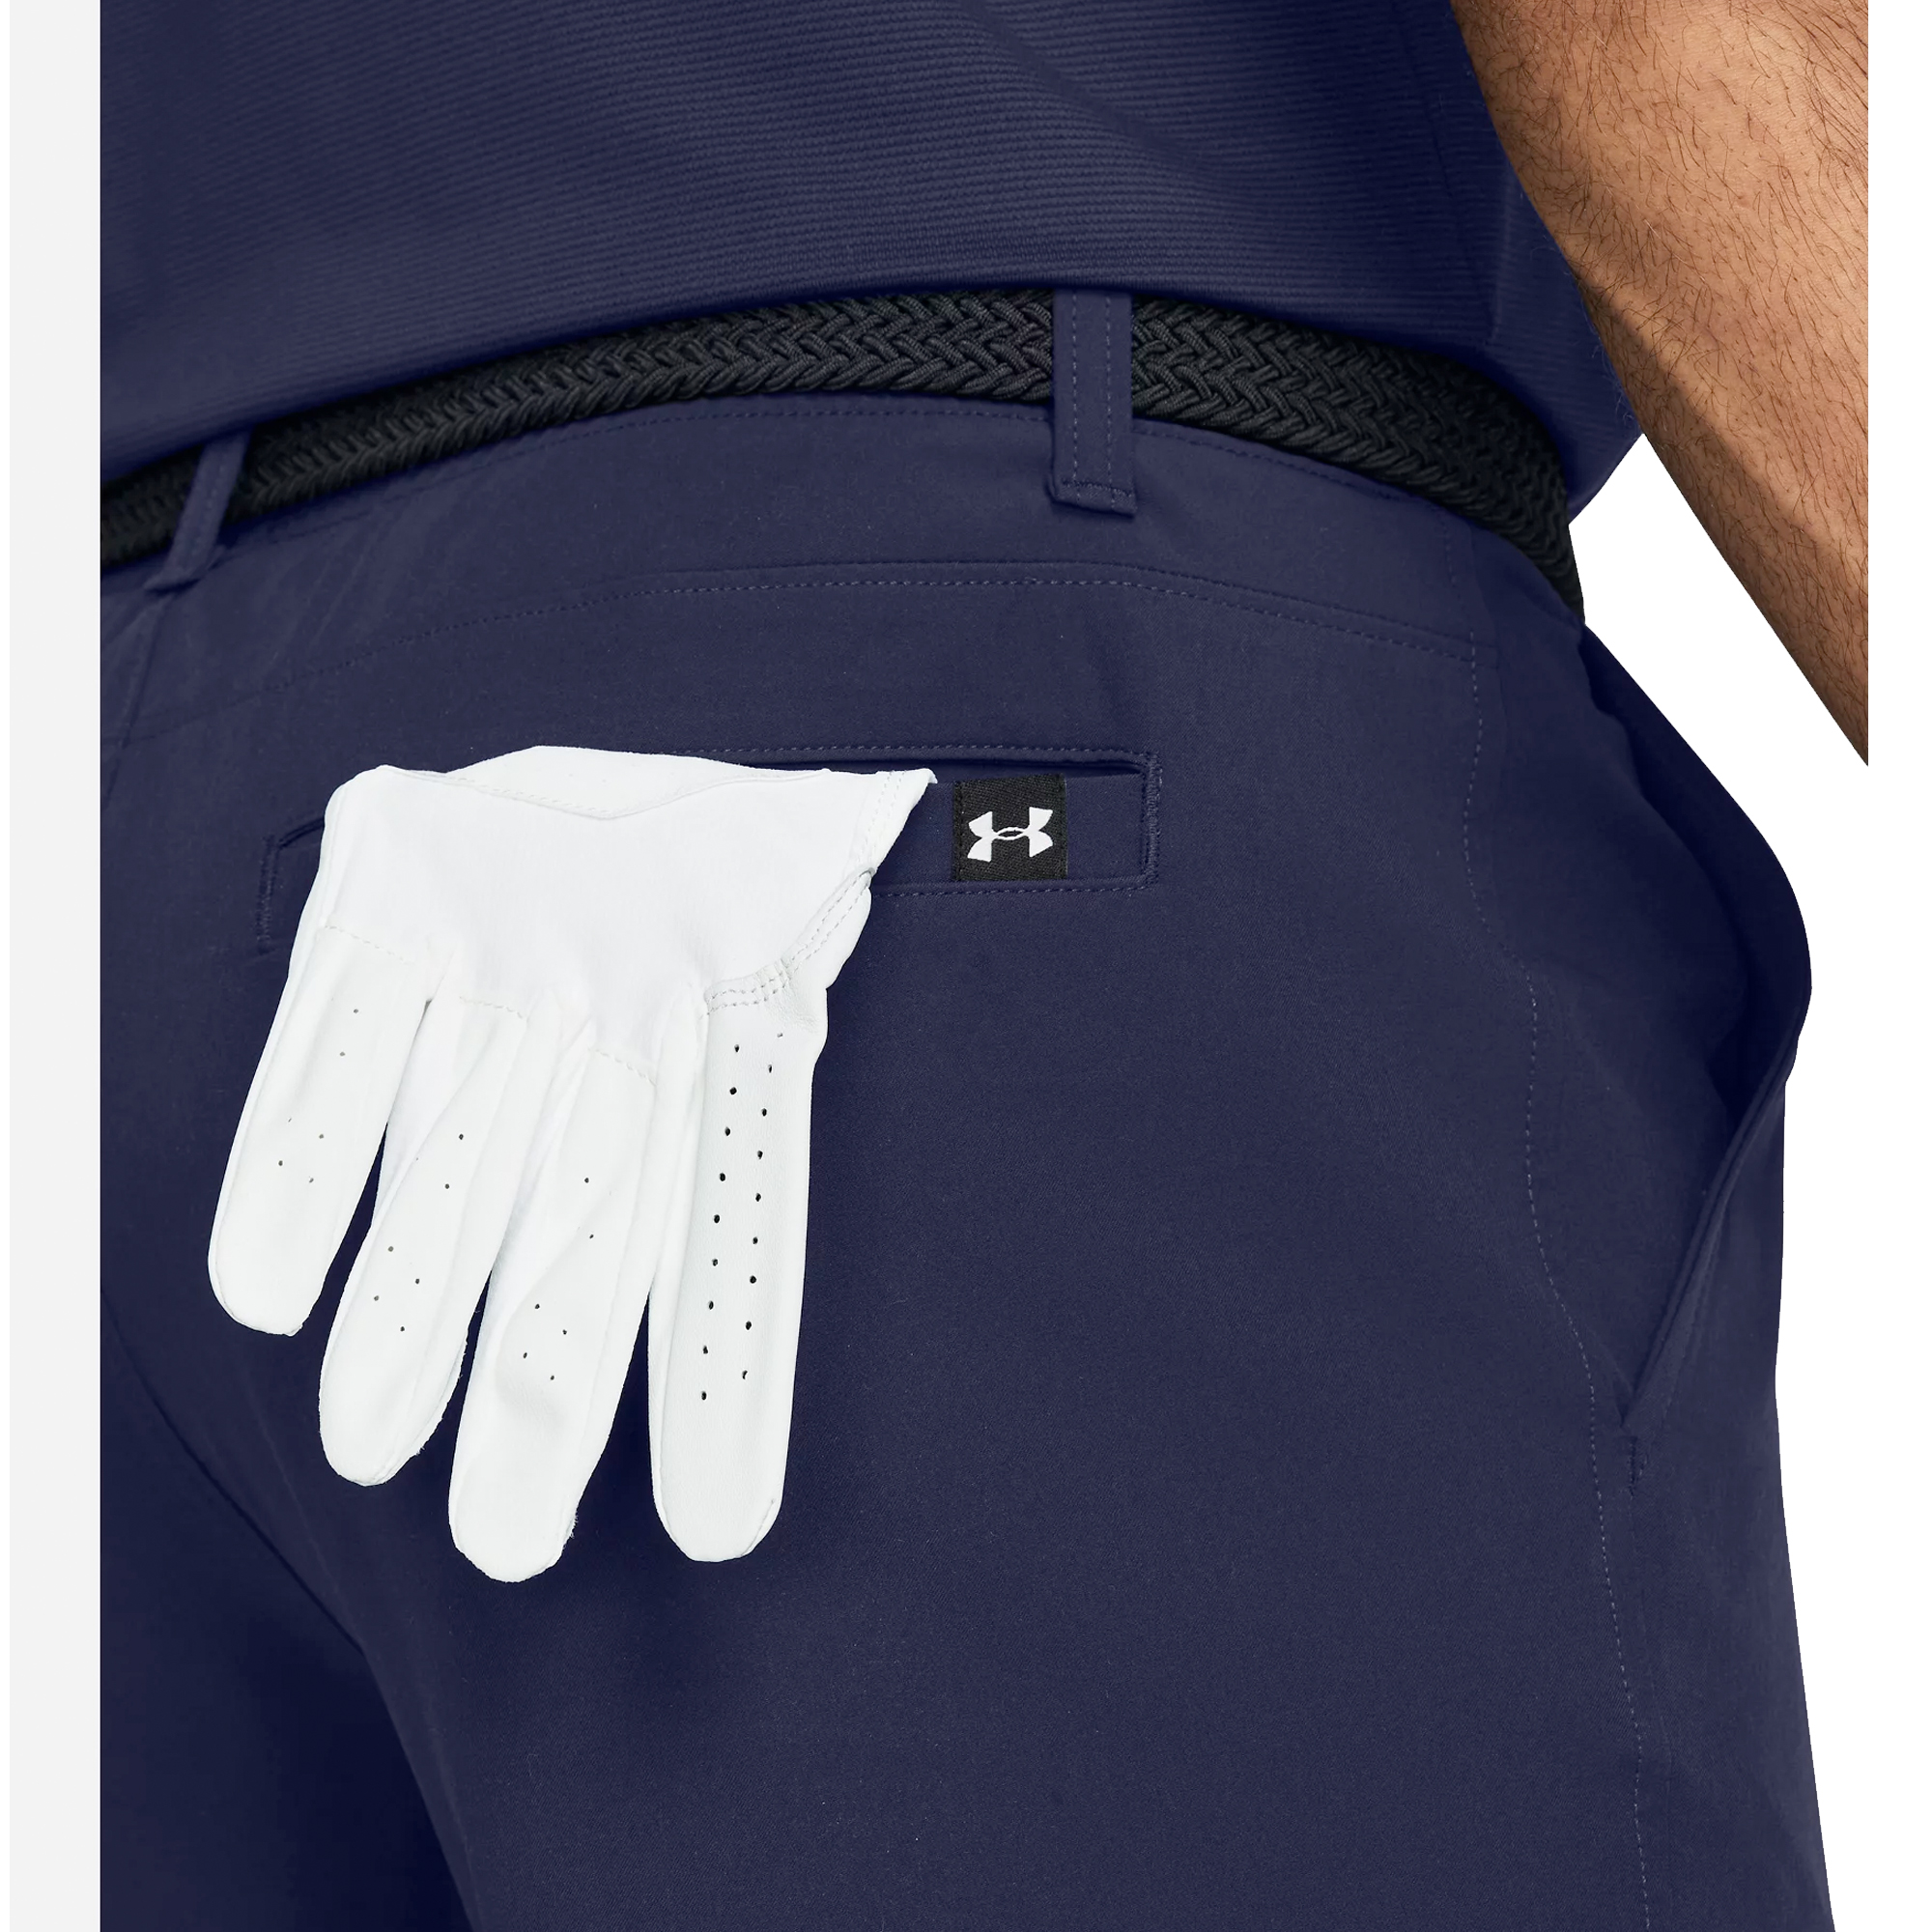 Under Armour Mens Golf Drive Tapered Golf Shorts 